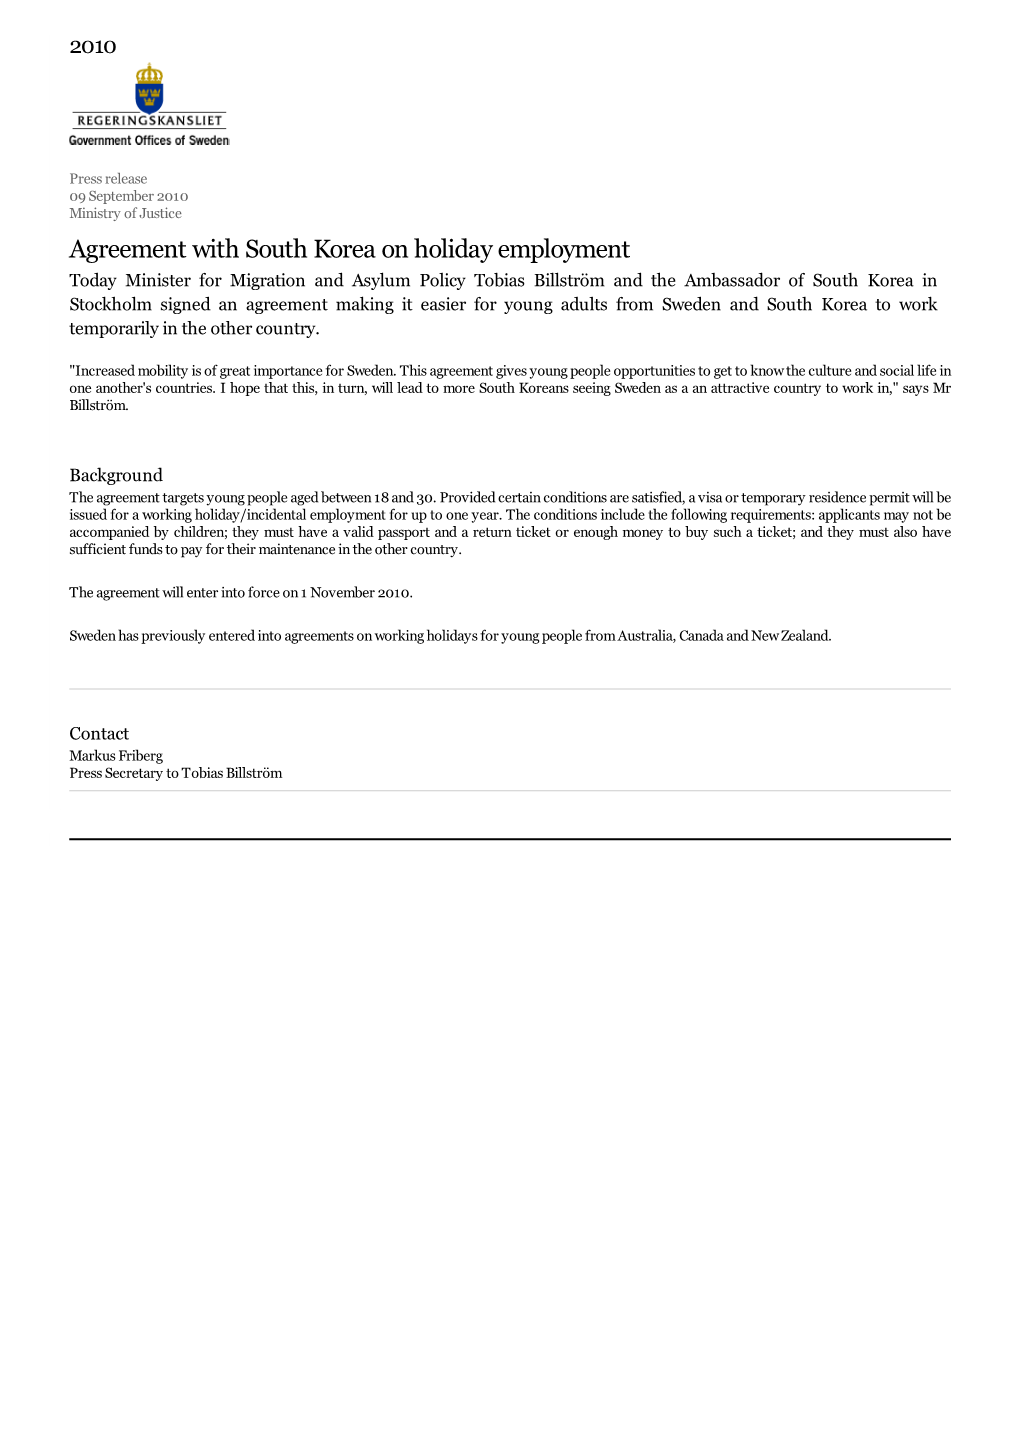 Agreement with South Korea on Holiday Employment